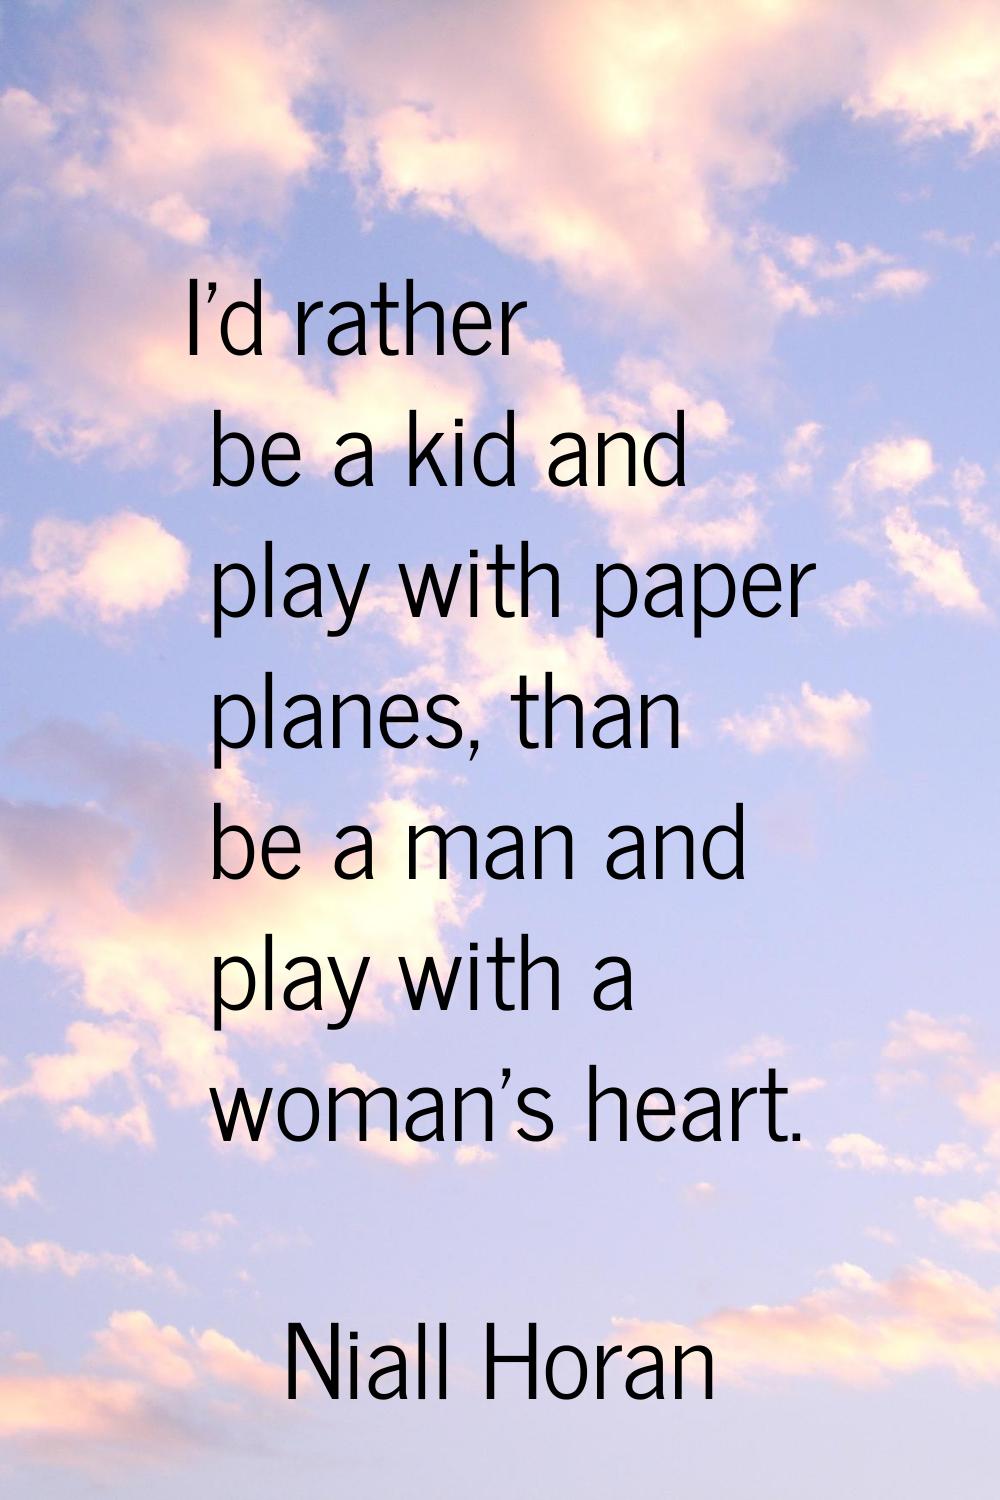 I'd rather be a kid and play with paper planes, than be a man and play with a woman's heart.